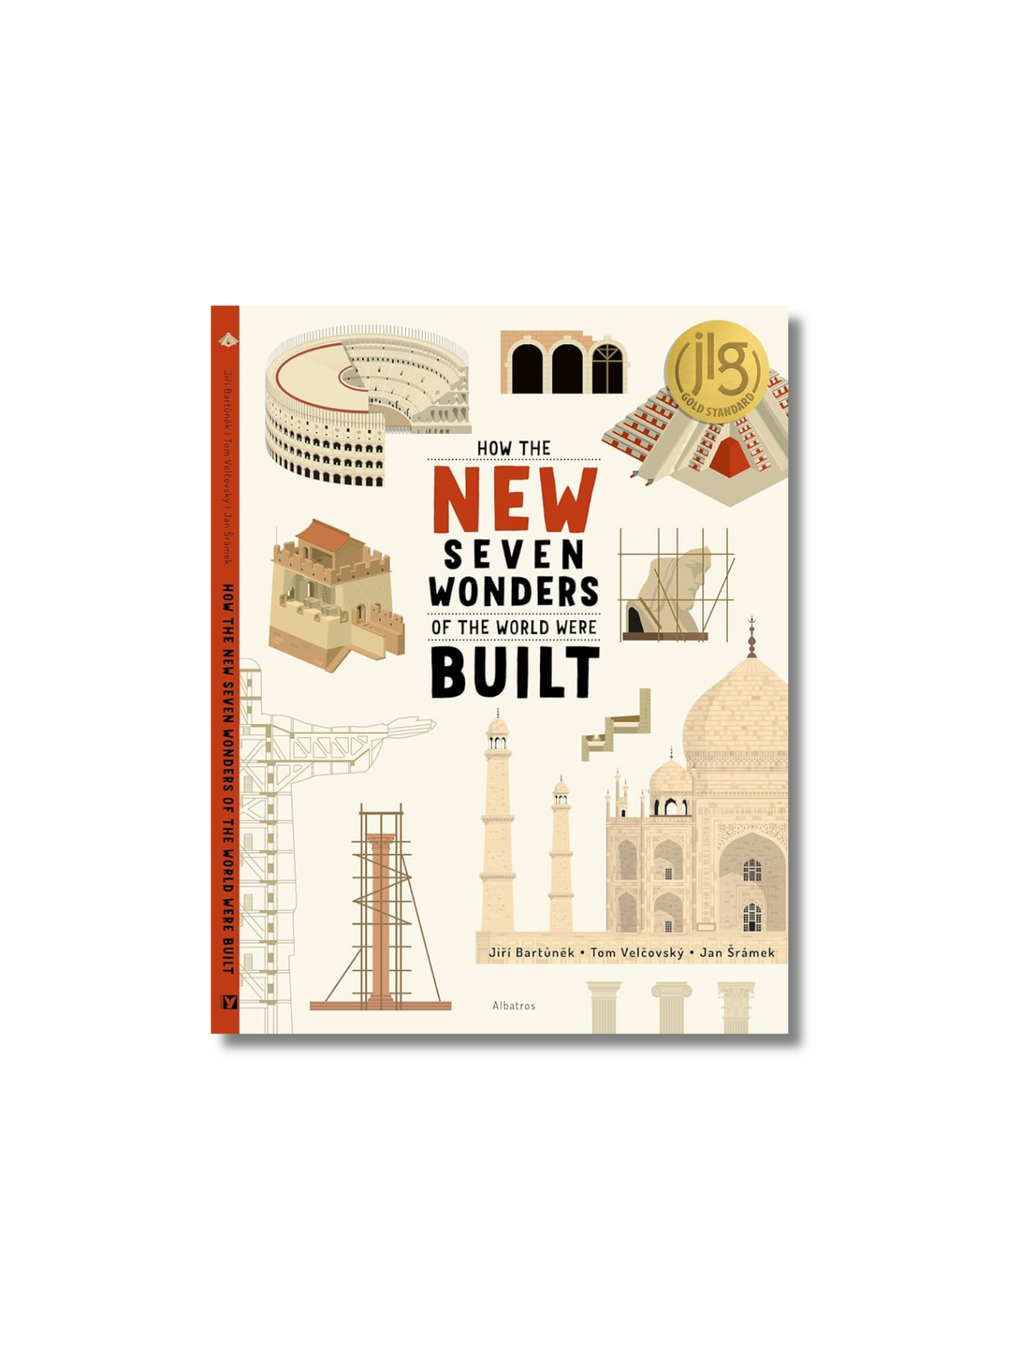 How the New Seven Wonders of the World Were Built